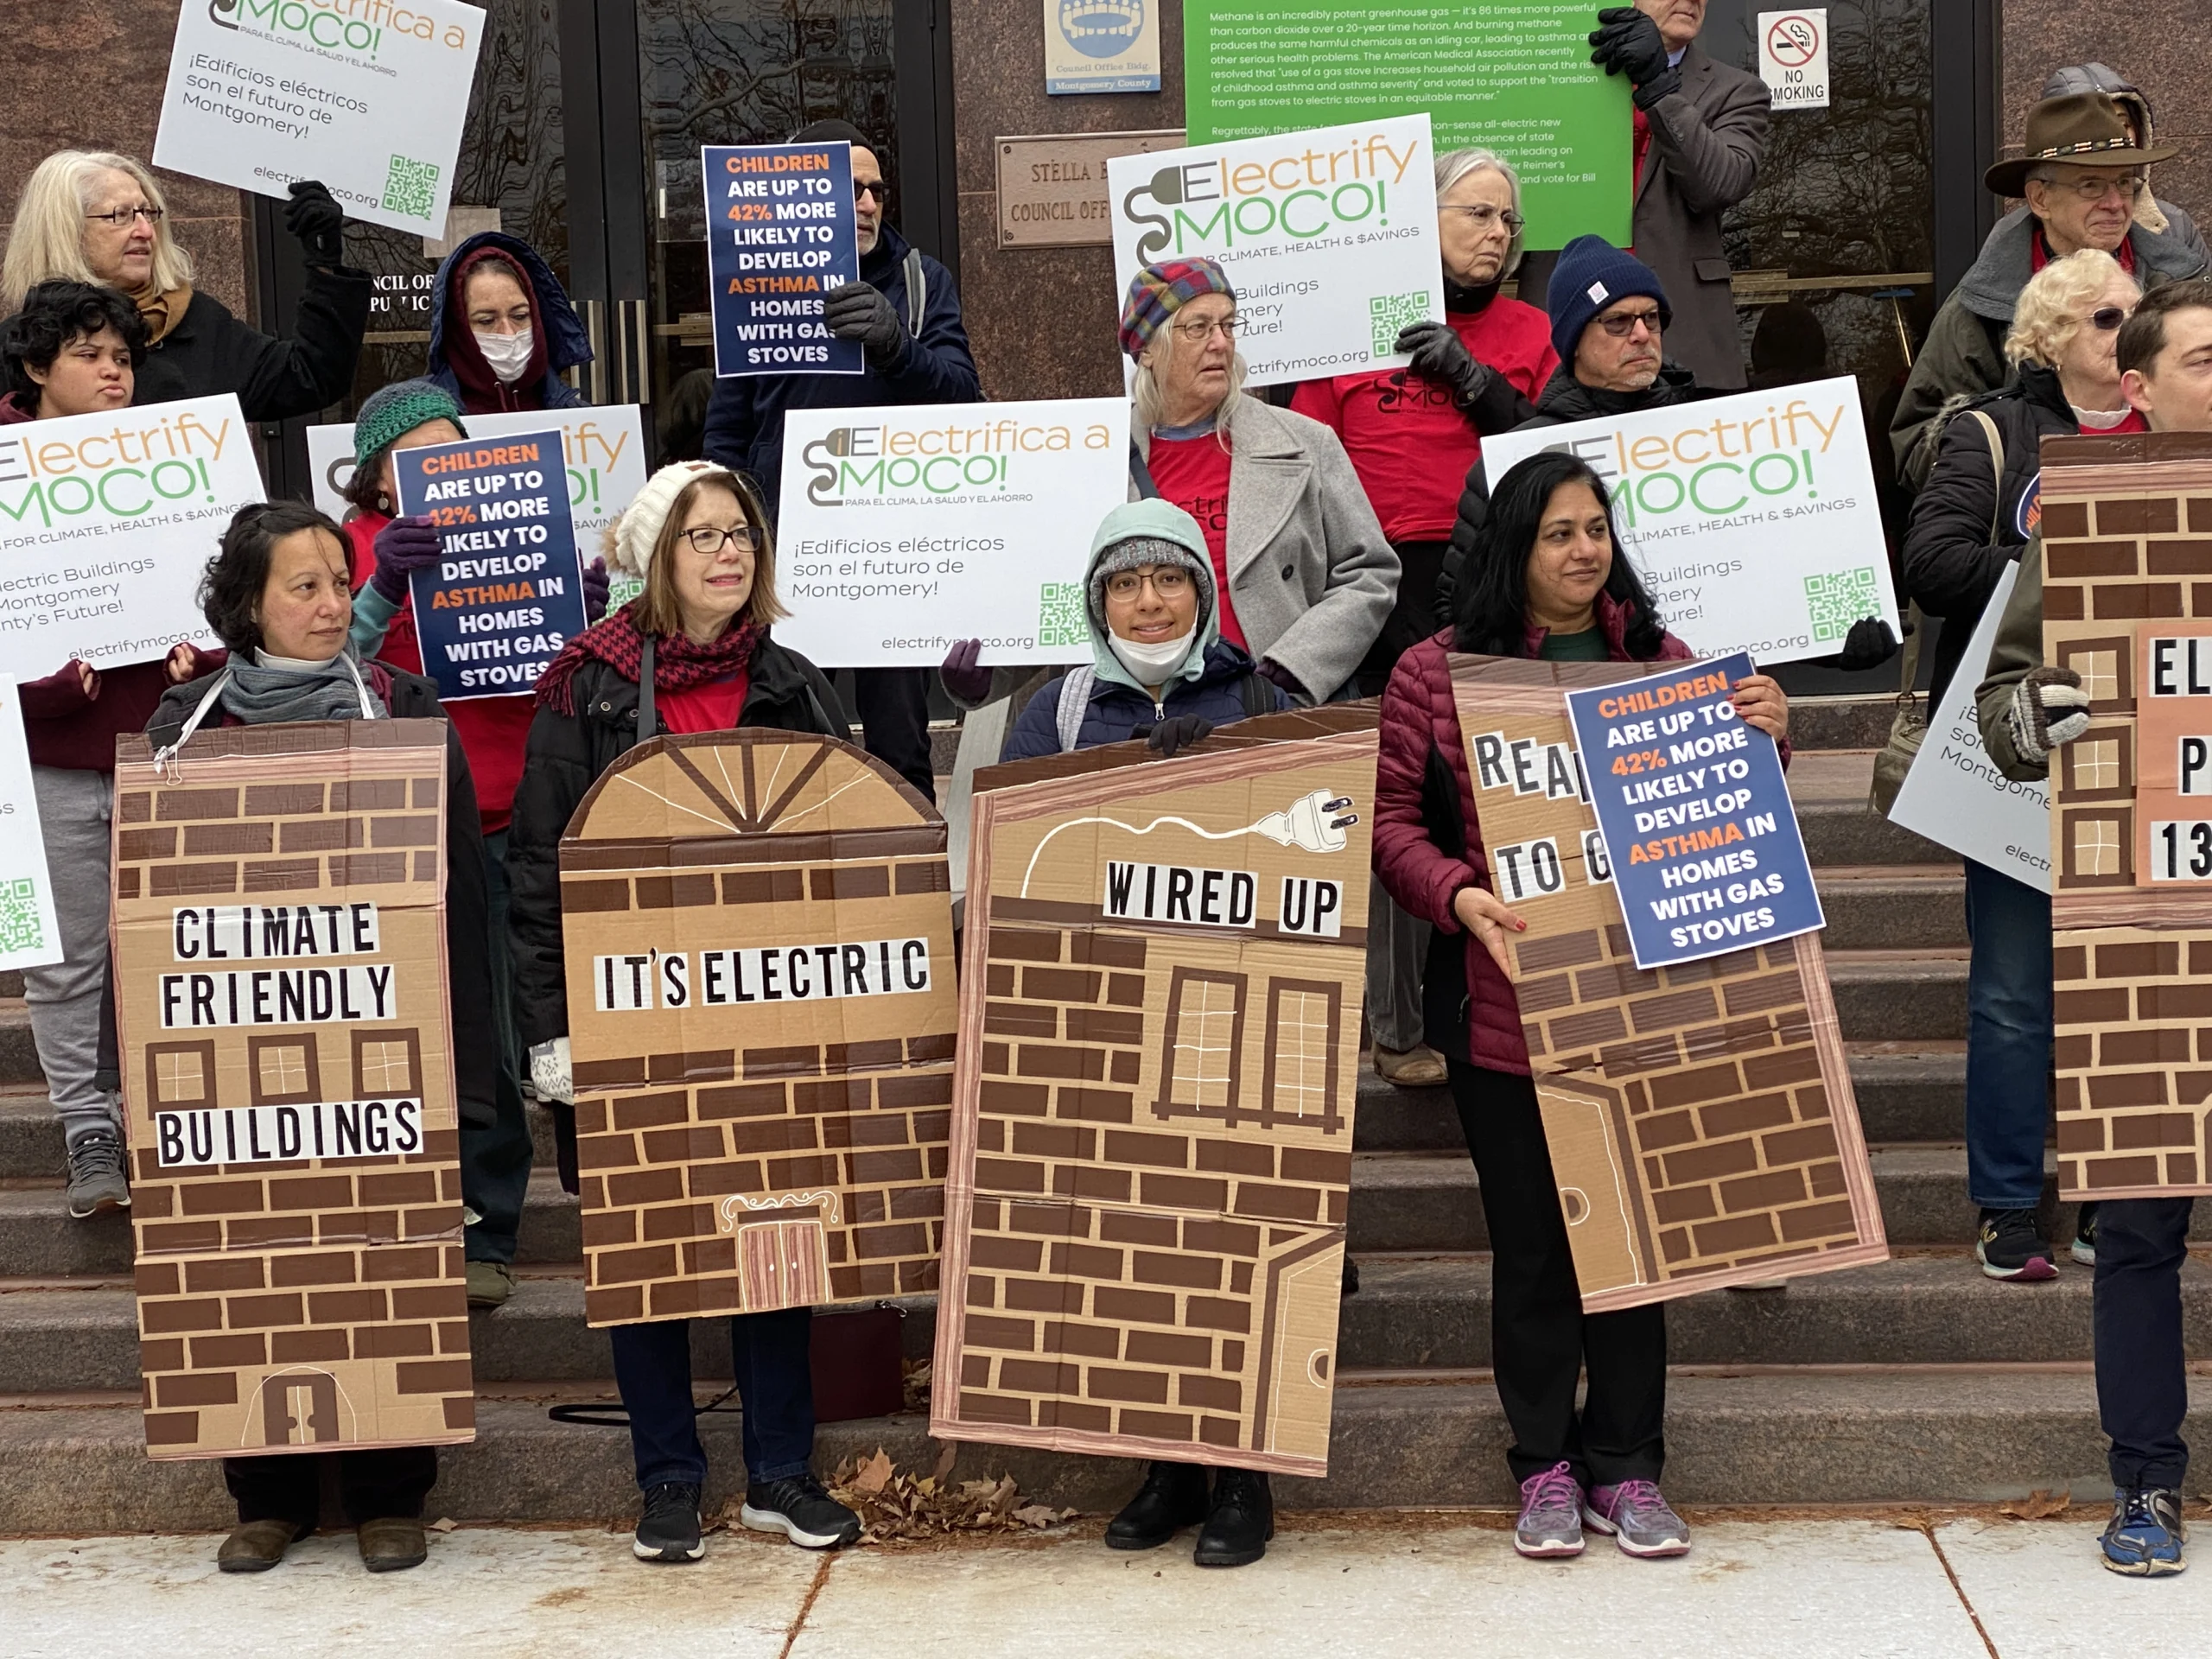 Four people holding cardboard signs made to look like buildings stand in the front row of a rally on the steps of the Montgomery County Council building. It is a chilly day in November and people are wearing hats and coats. On the buildings they say "Climate Friendly Buildings" "It's Electric" "Wired Up" "Ready to Go".